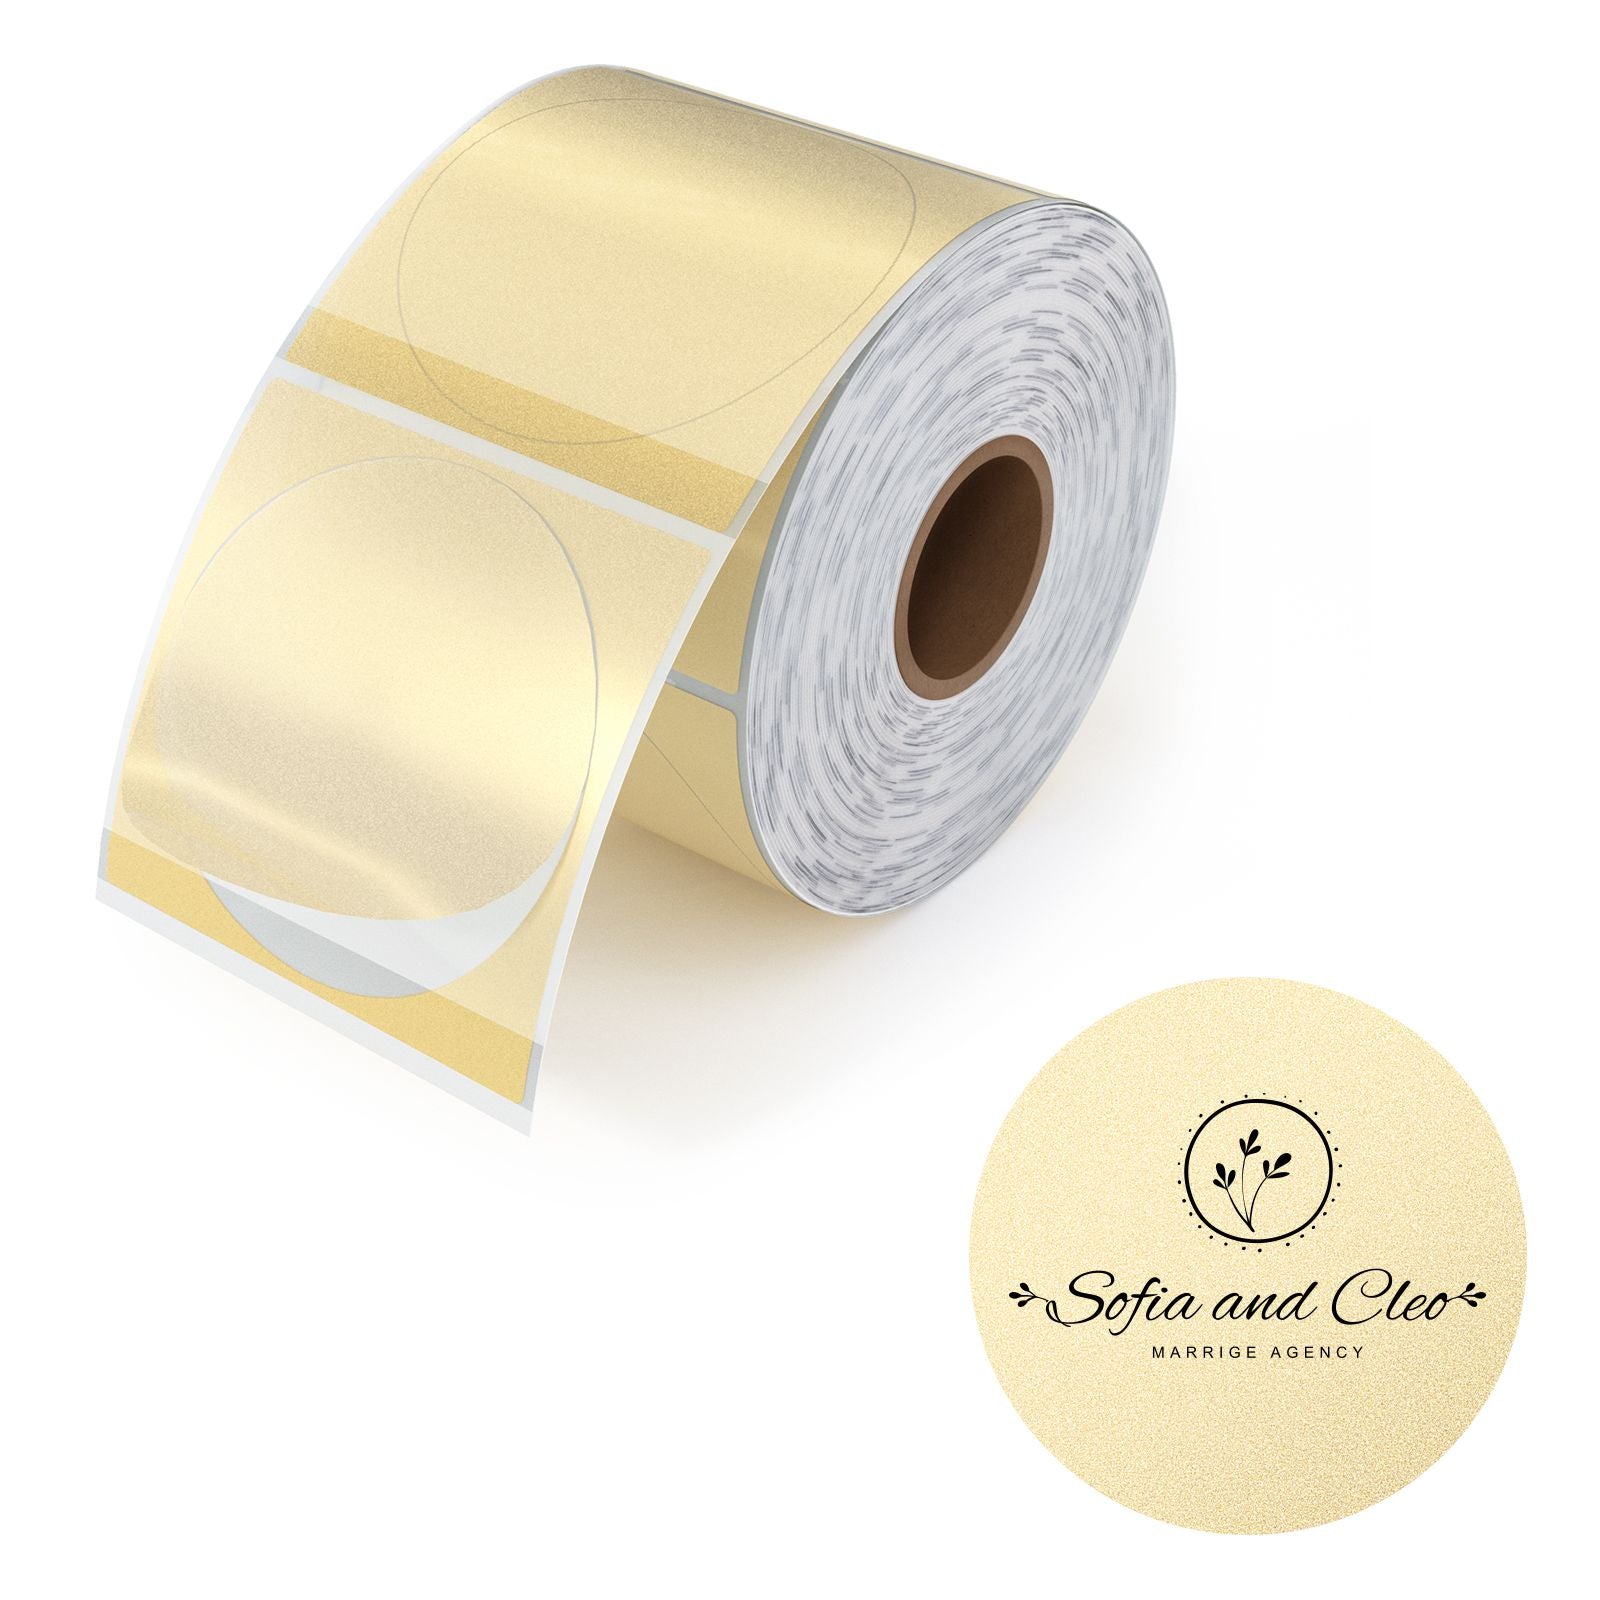 MUNBYN gold round thermal label stickers 500 labels per roll.